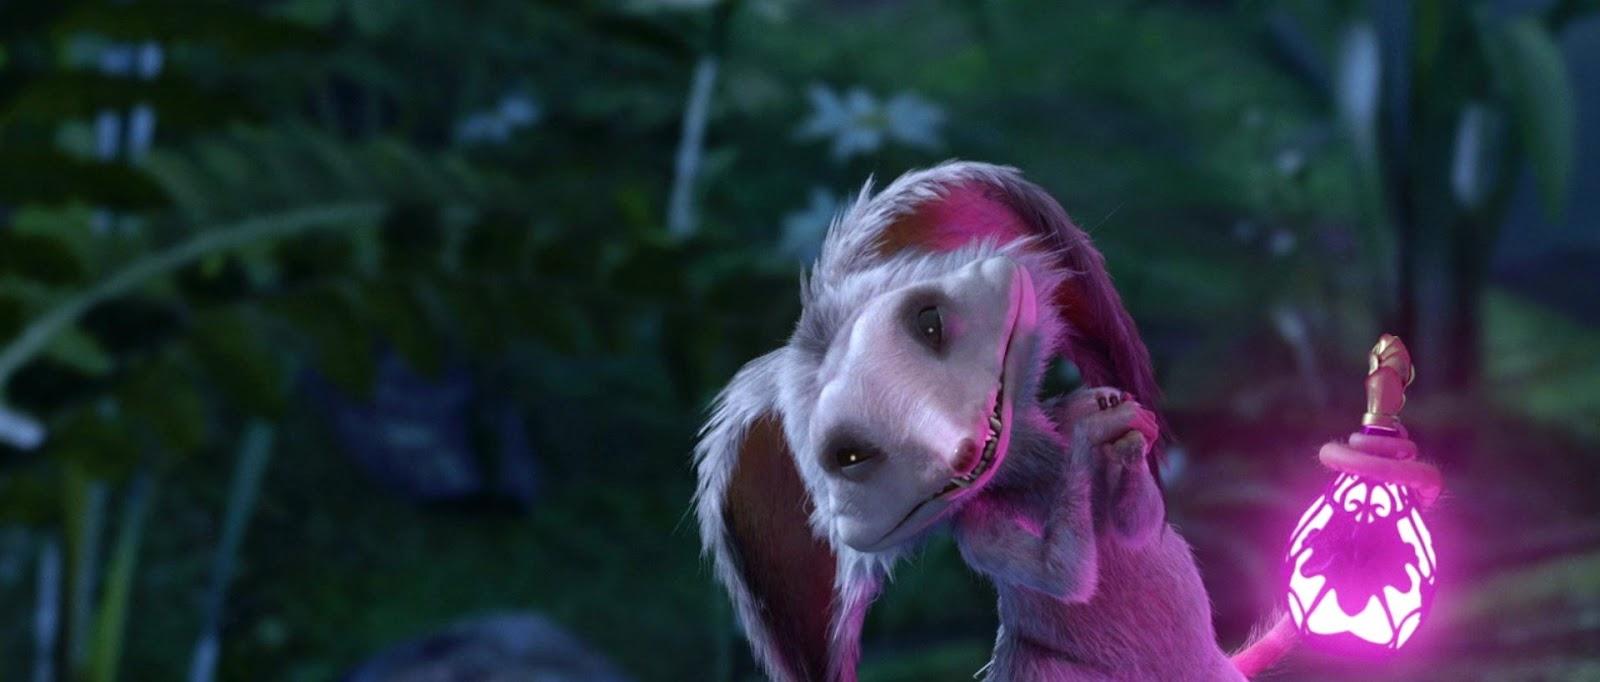 New image and “Making of” featurette for STRANGE MAGIC